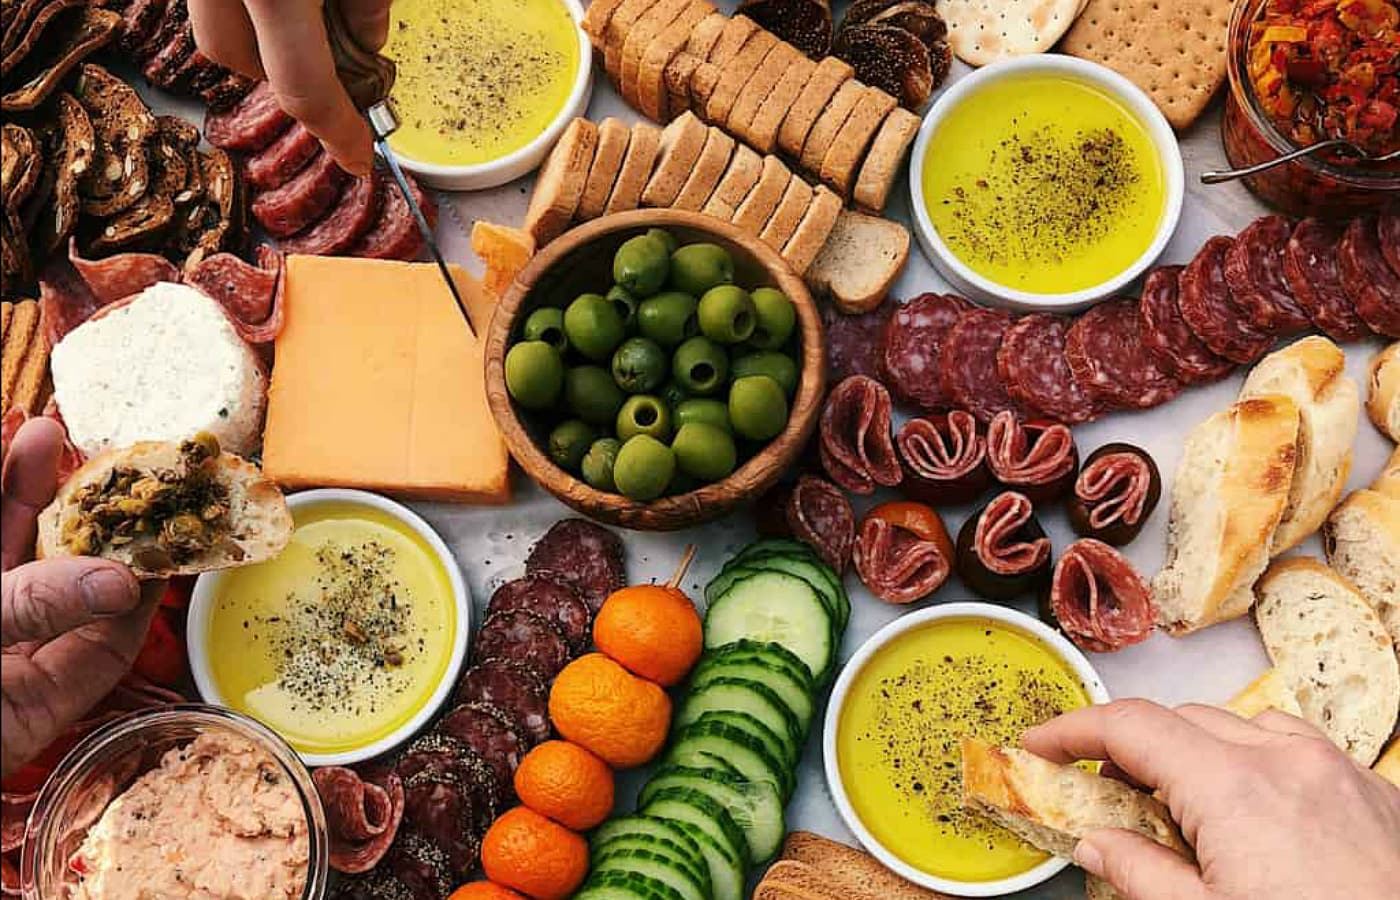 How to Make a Charcuterie Board (Meat and Cheese Platter)